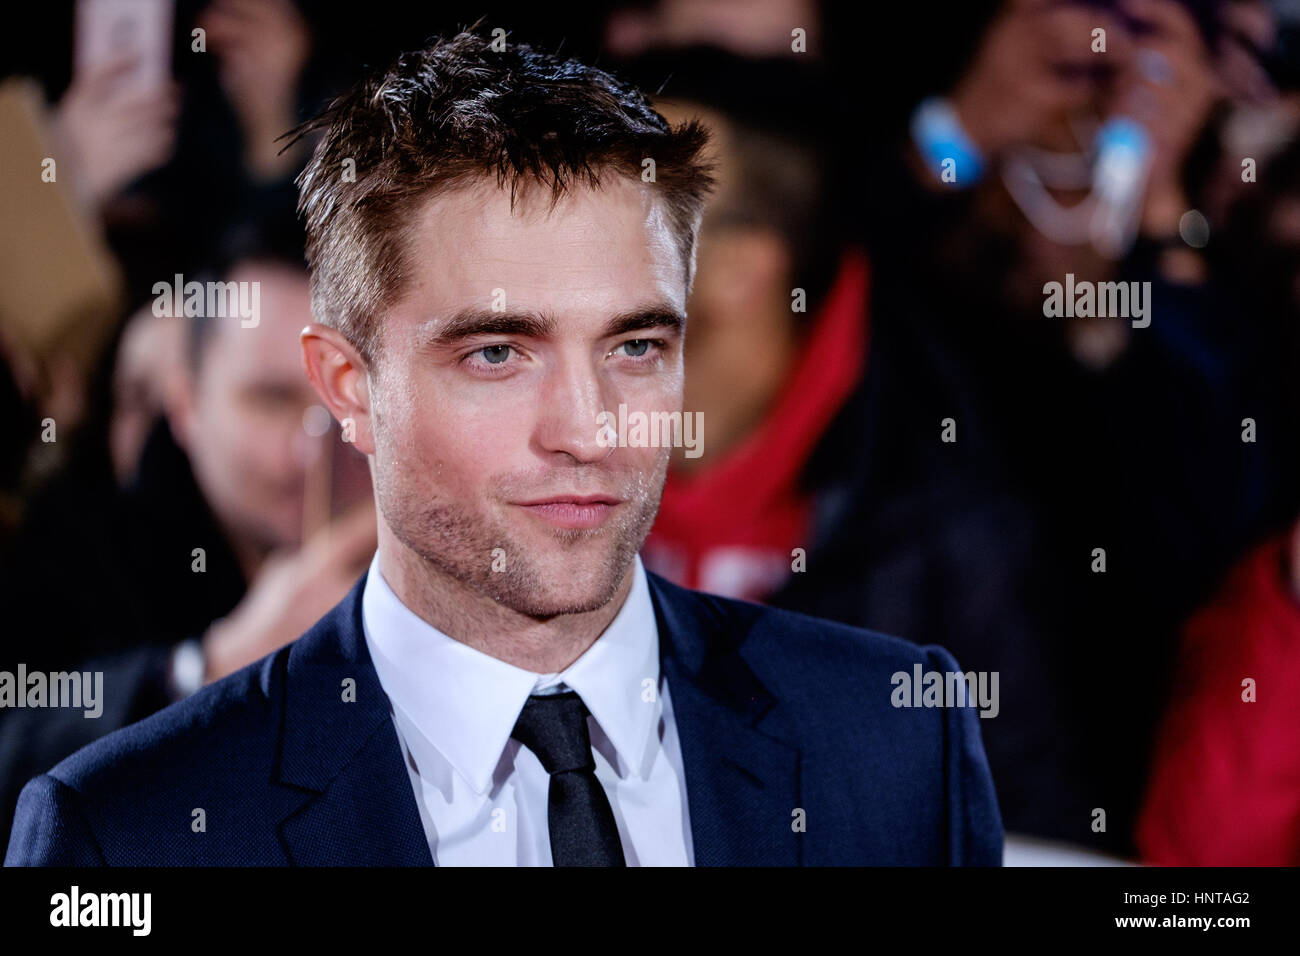 London, UK. 16th February 2017. Robert Pattinson arrives at the UK Premiere of the Lost City of Z on 16/02/2017 at The British Museum, . Persons pictured: Robert Pattinson. Picture by Credit: Julie Edwards/Alamy Live News Stock Photo